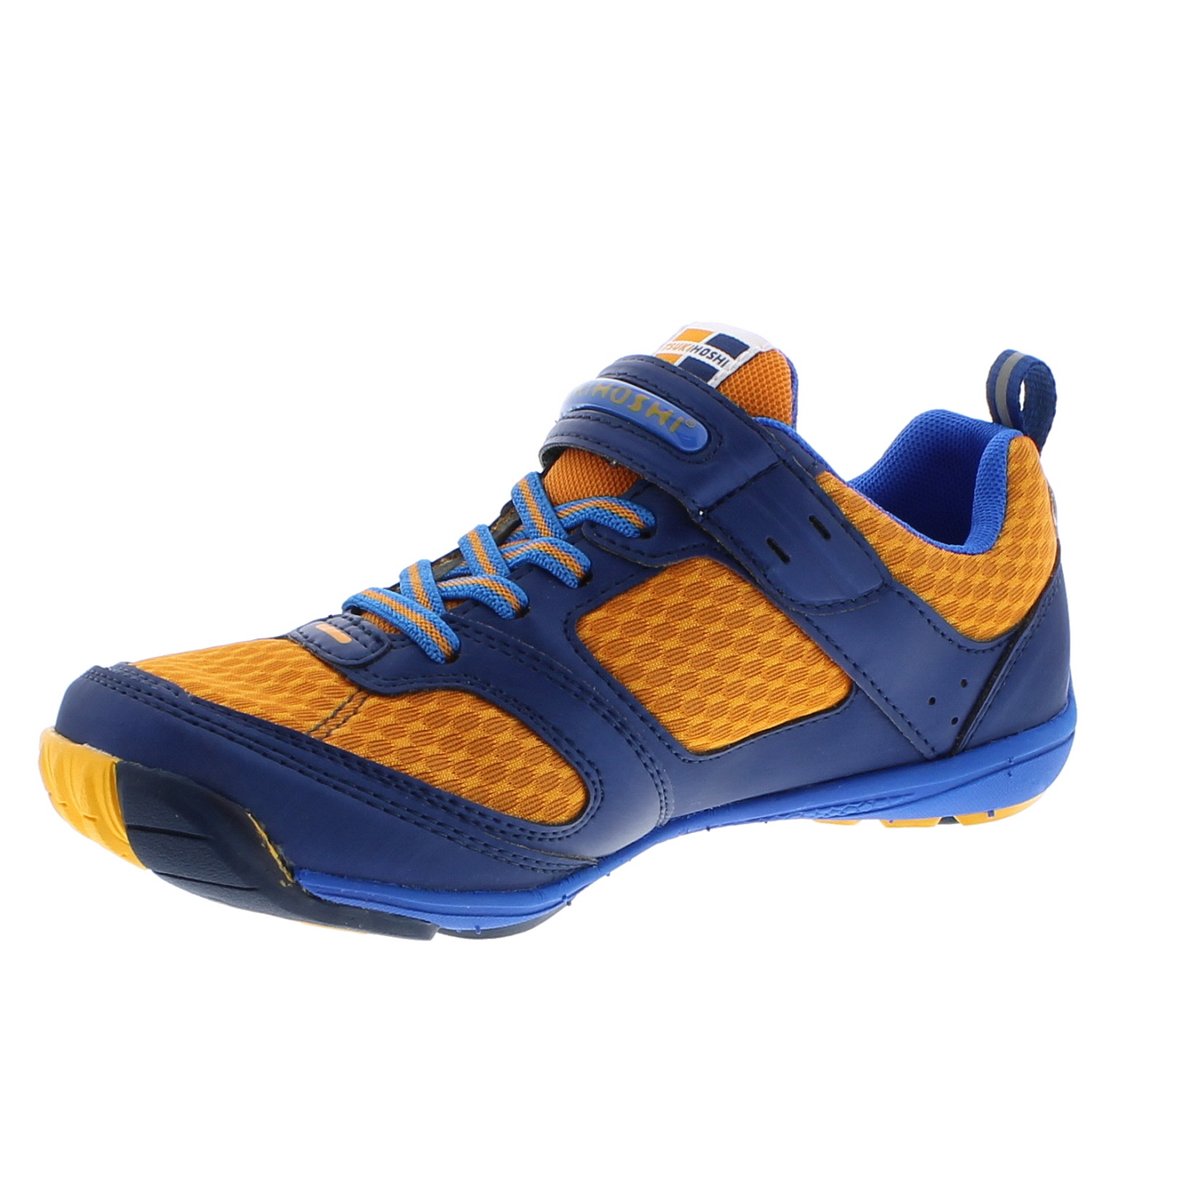 Youth Tsukihoshi Mako Sneaker in Navy/Orange from the front view